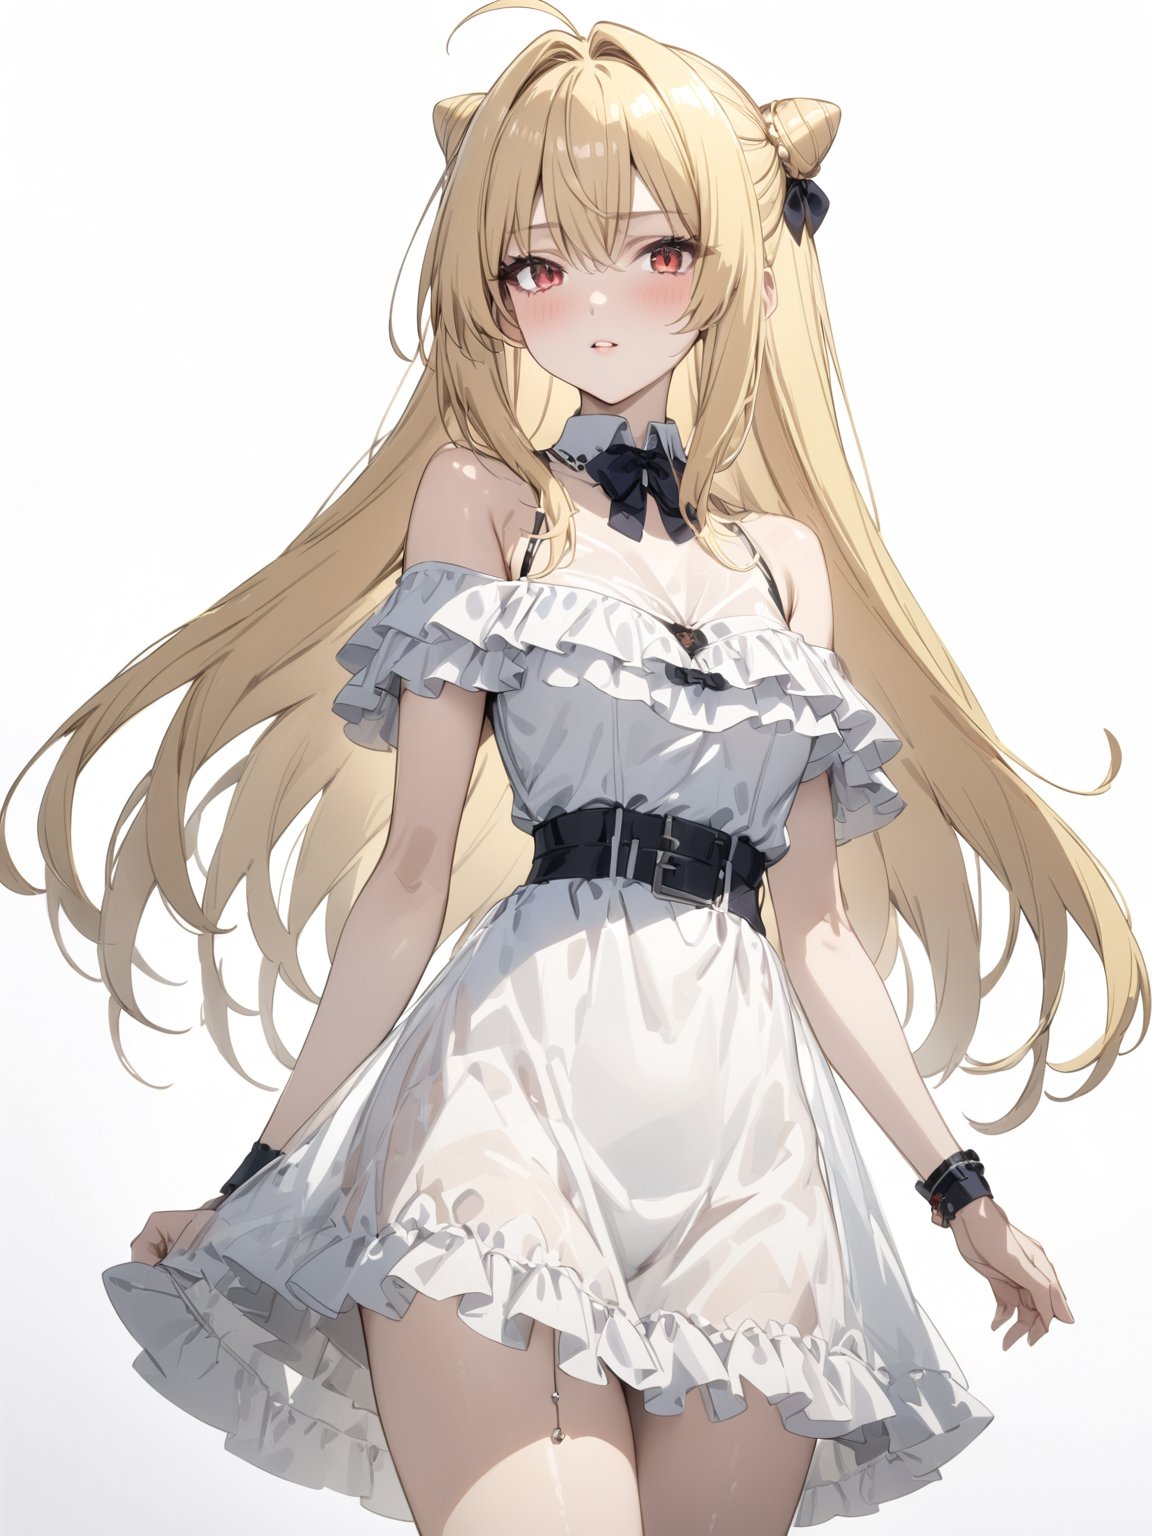 //Quality, masterpiece, best quality, detailmaster2, 8k, 8k UHD, ultra detailed, ultra-high resolution, ultra-high definition, highres, 
//Character, 1girl, solo,Terakomari, long hair, blonde hair, red eyes, ahoge, 
//Fashion, frills, off shoulder, hair bun, dress, see-through, off-shoulder dress,
//Background, white background, 
//Others, 